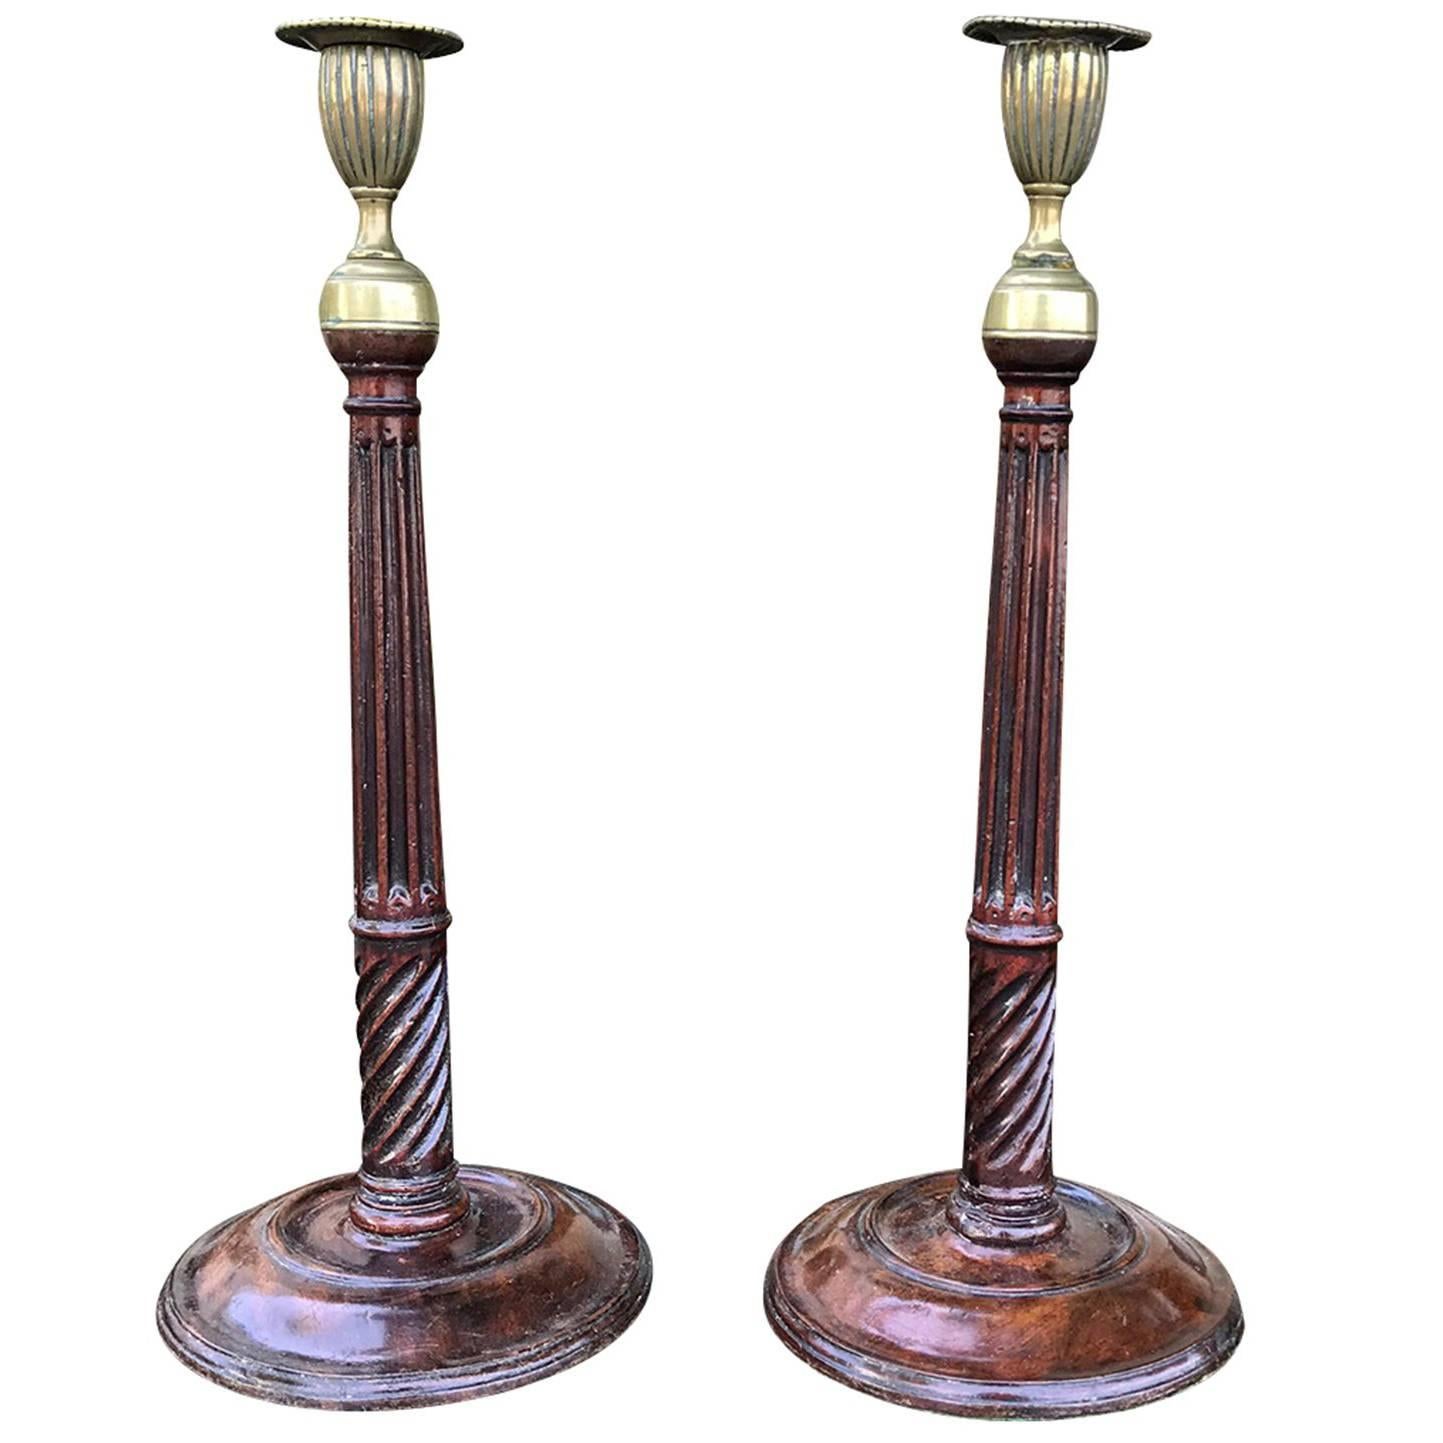 Pair of 18th-19th Century George III Style Antique Brass-Mounted Candlesticks